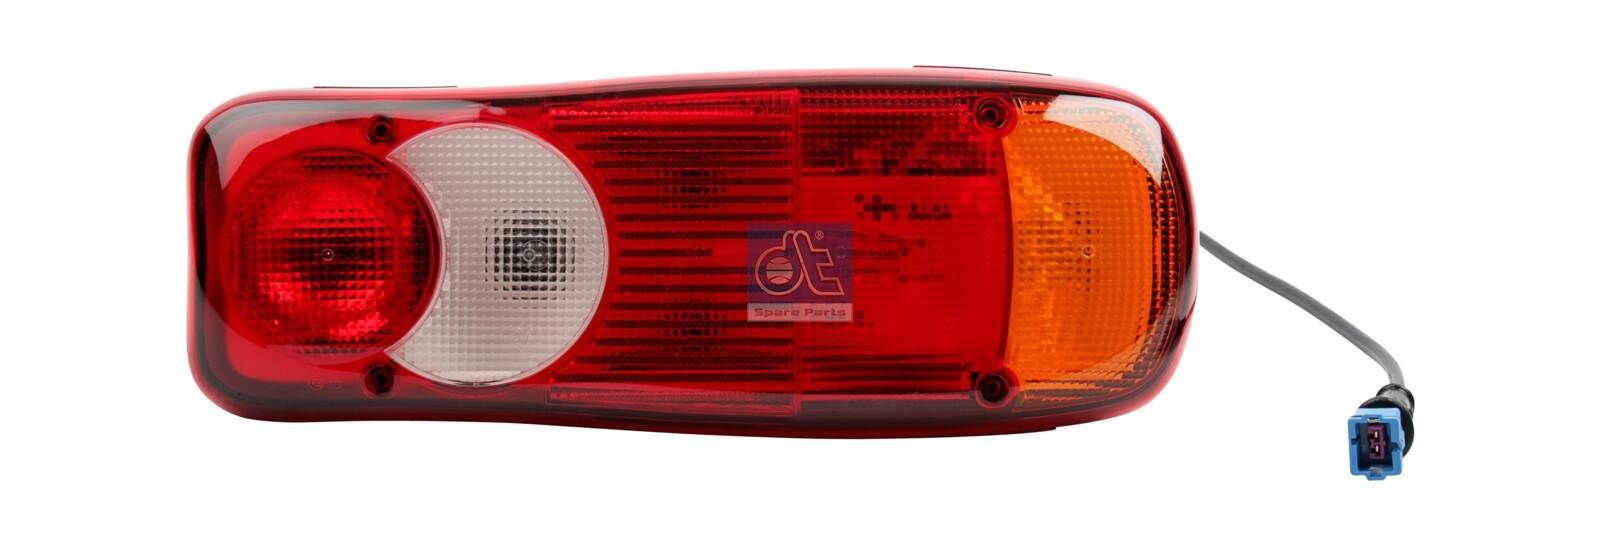 152880 DT Spare Parts 2.24515 Lens, combination rearlight 74 20 862 035